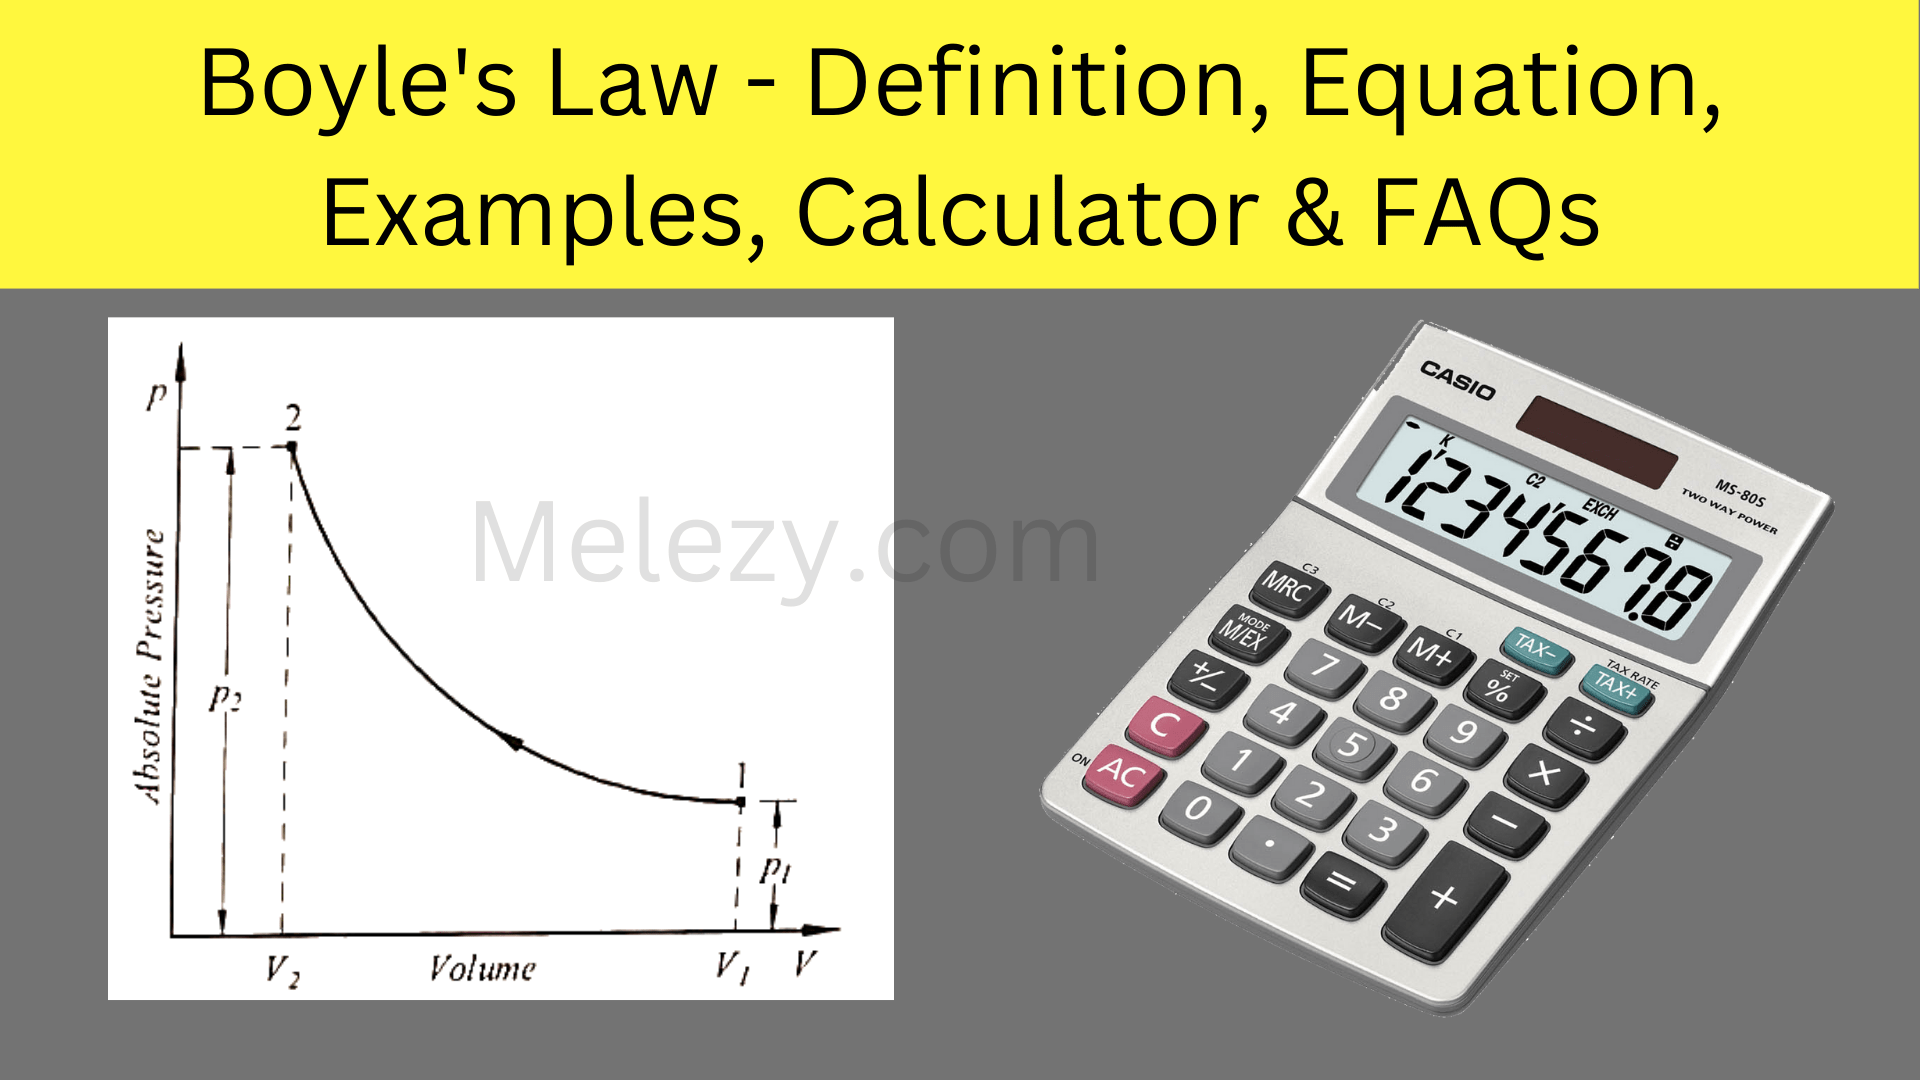 Boyle's Law - Definition, Equation, Examples, Calculator & FAQs